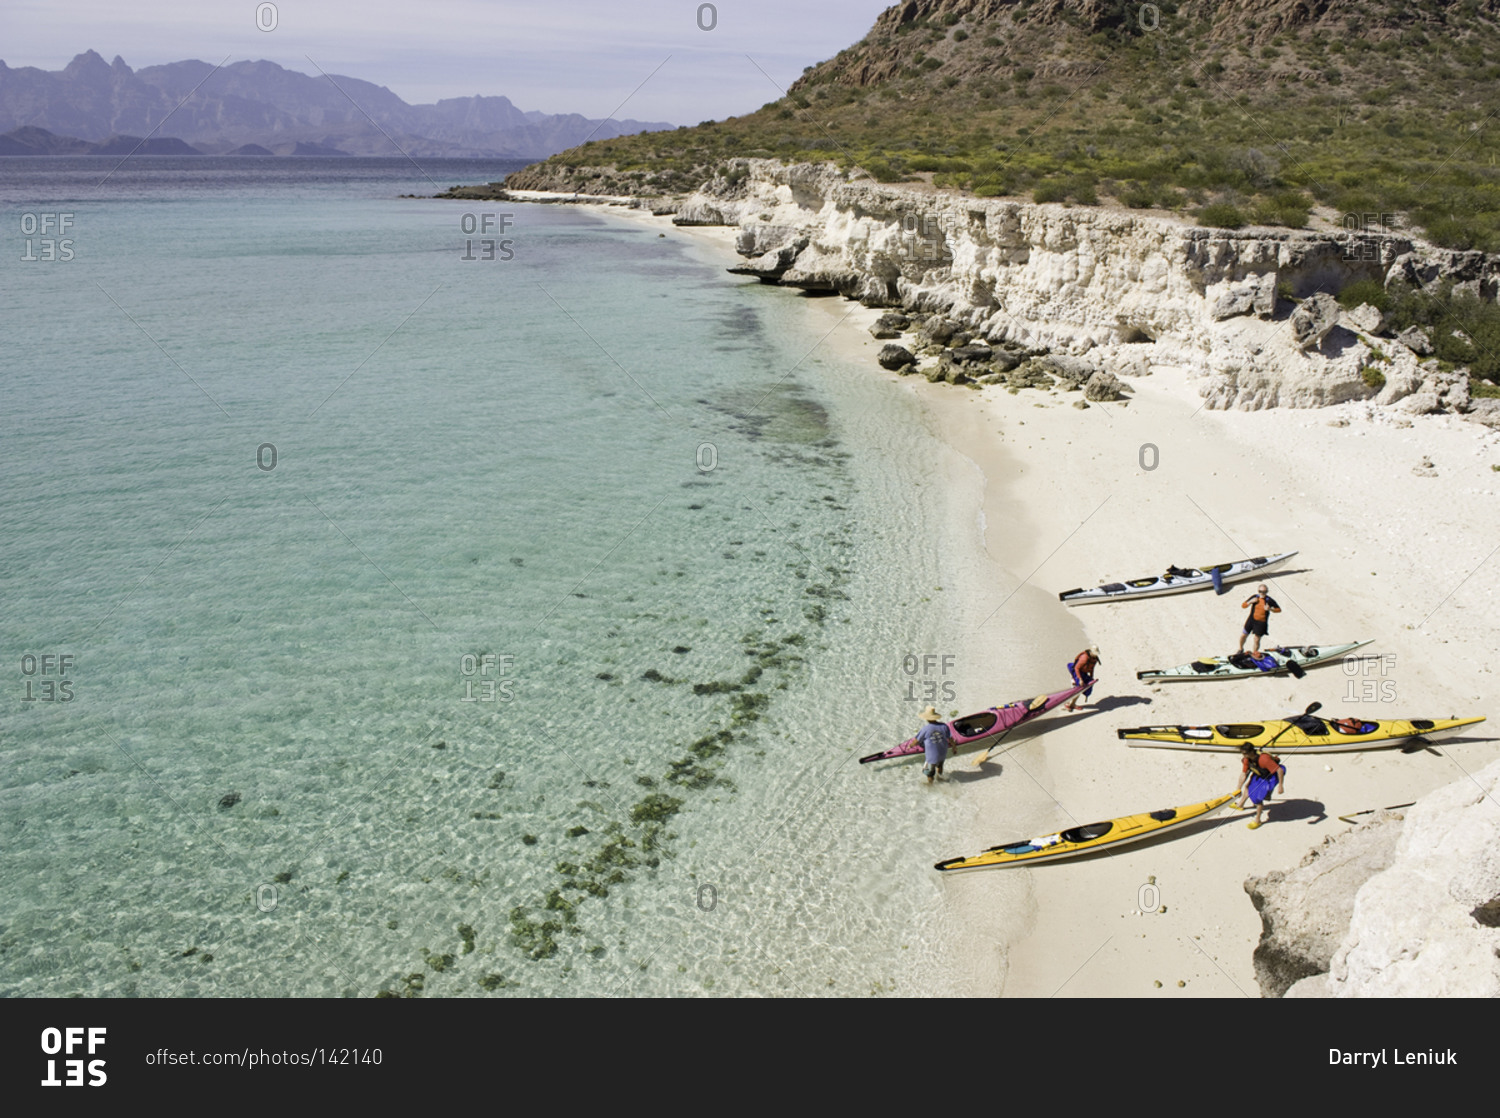 Kayakers getting ready for a trip on the sea in Mexico